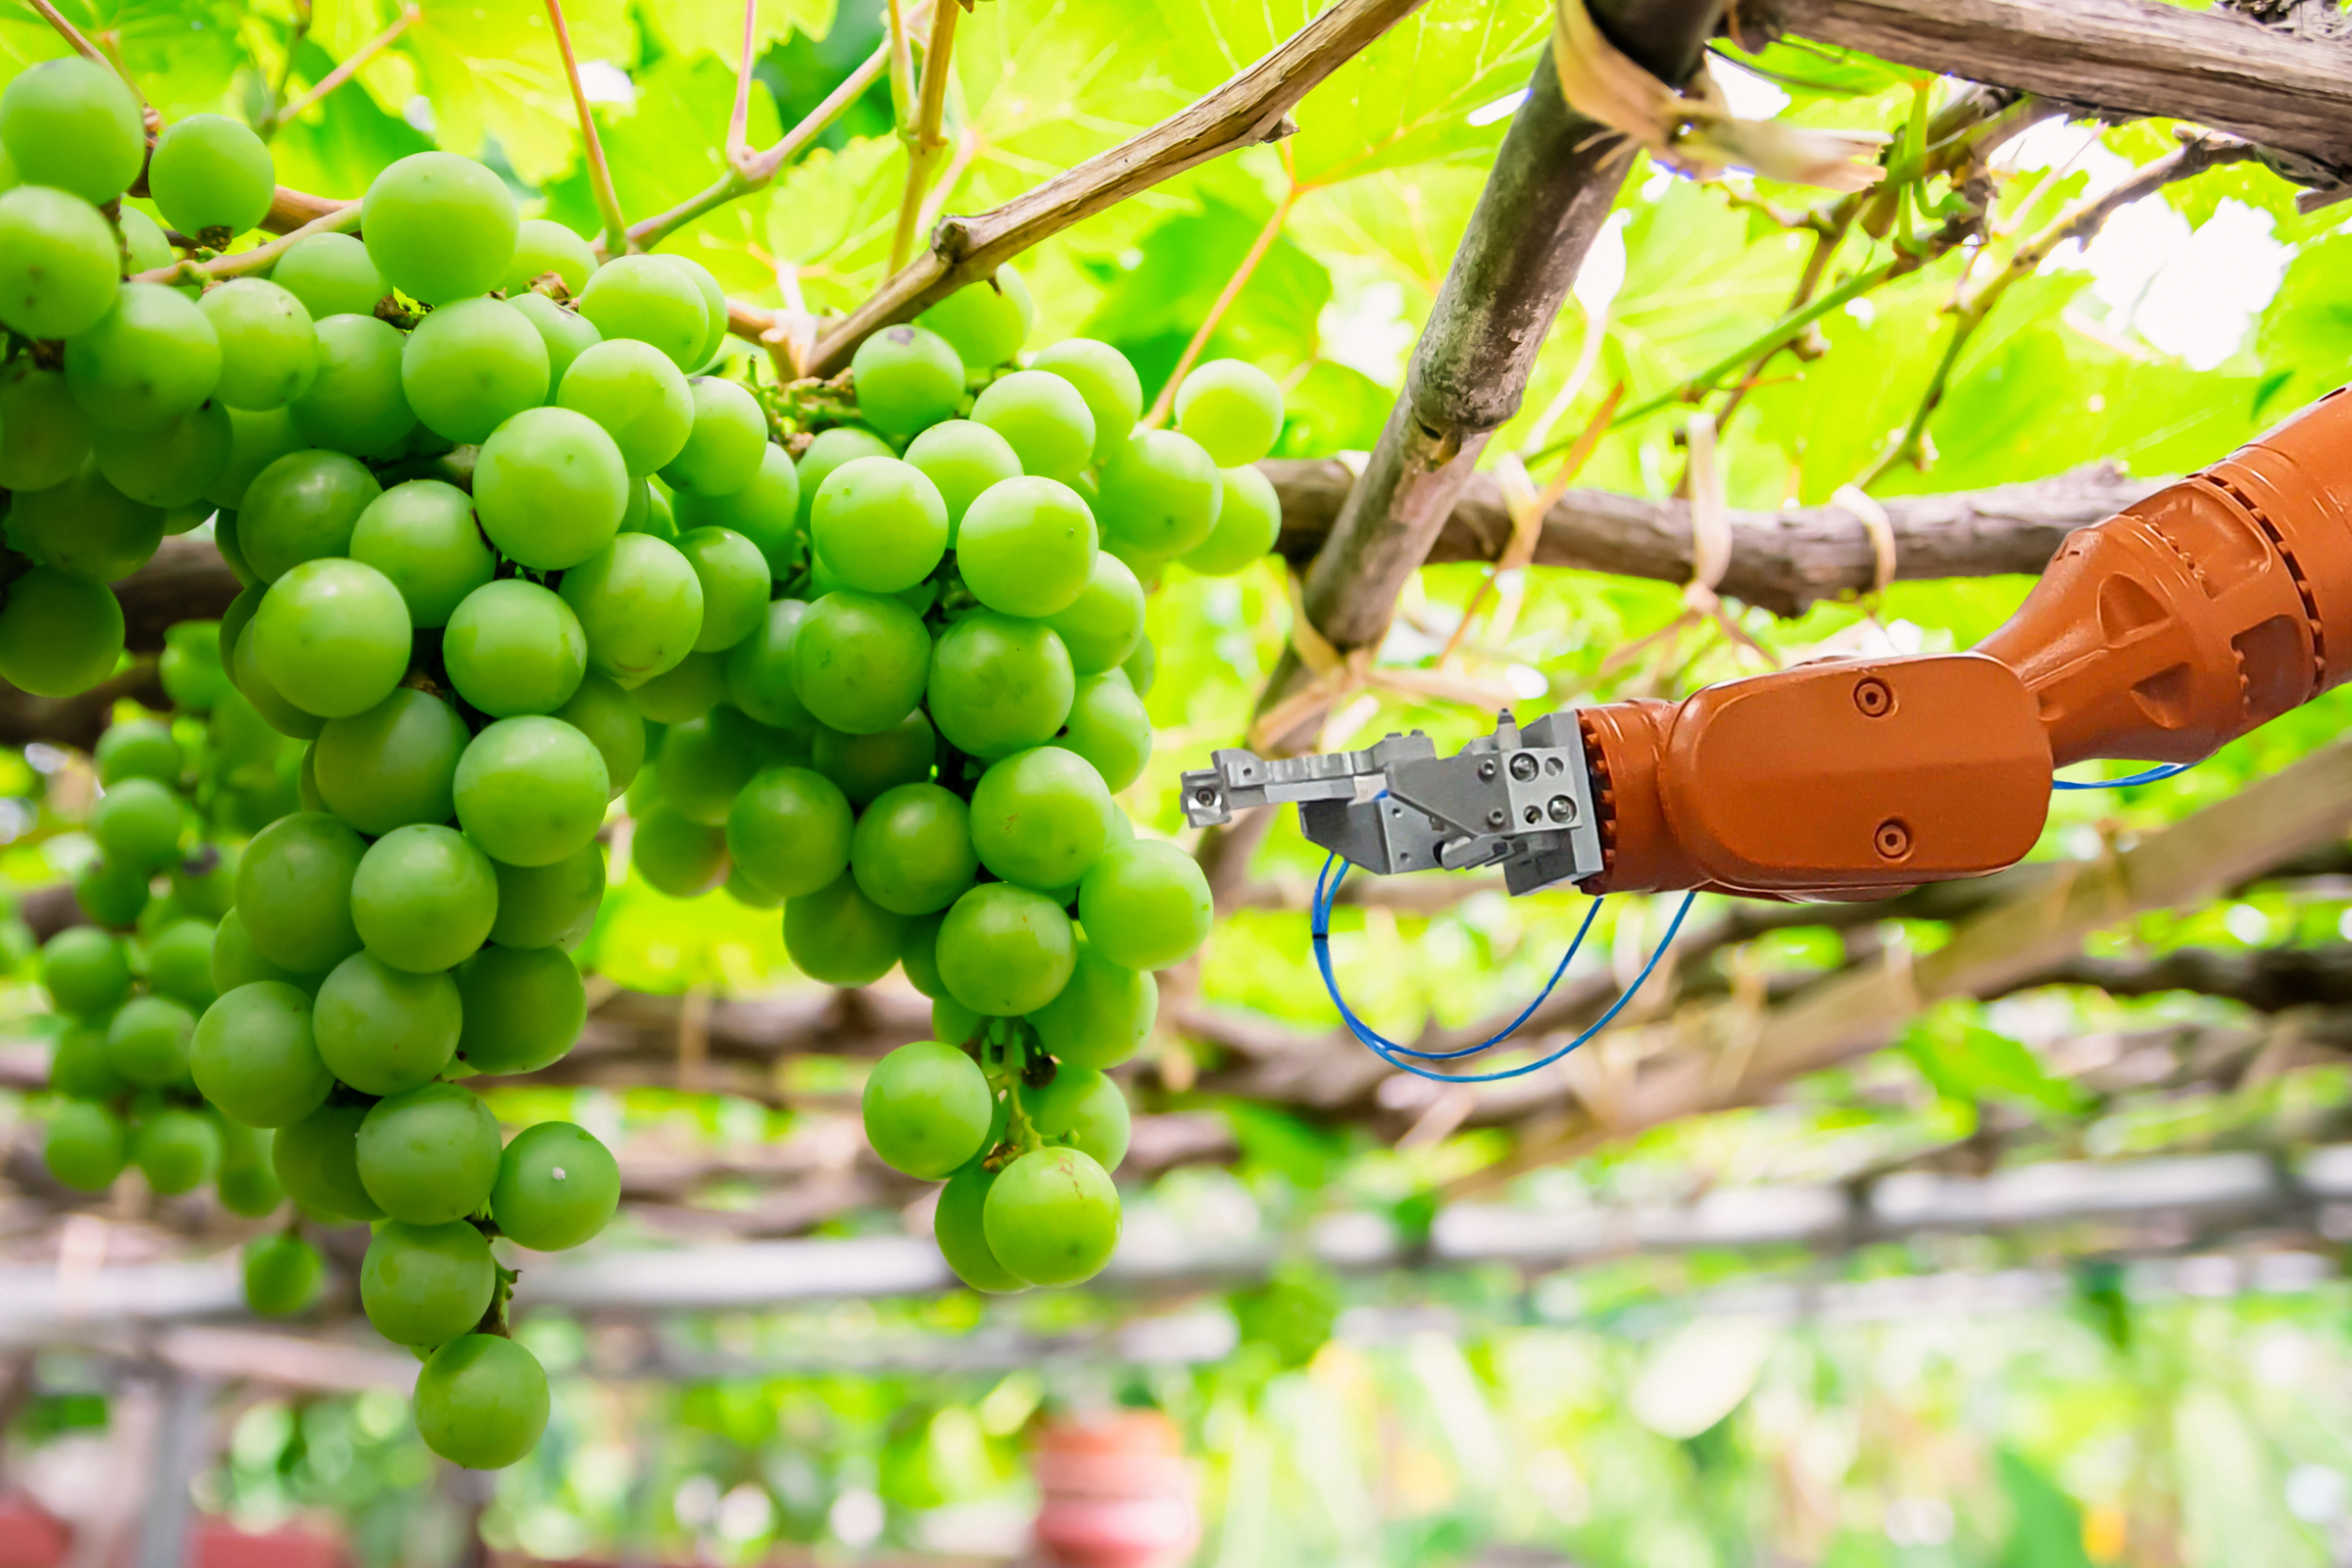 Cellular enabled robots in agriculture